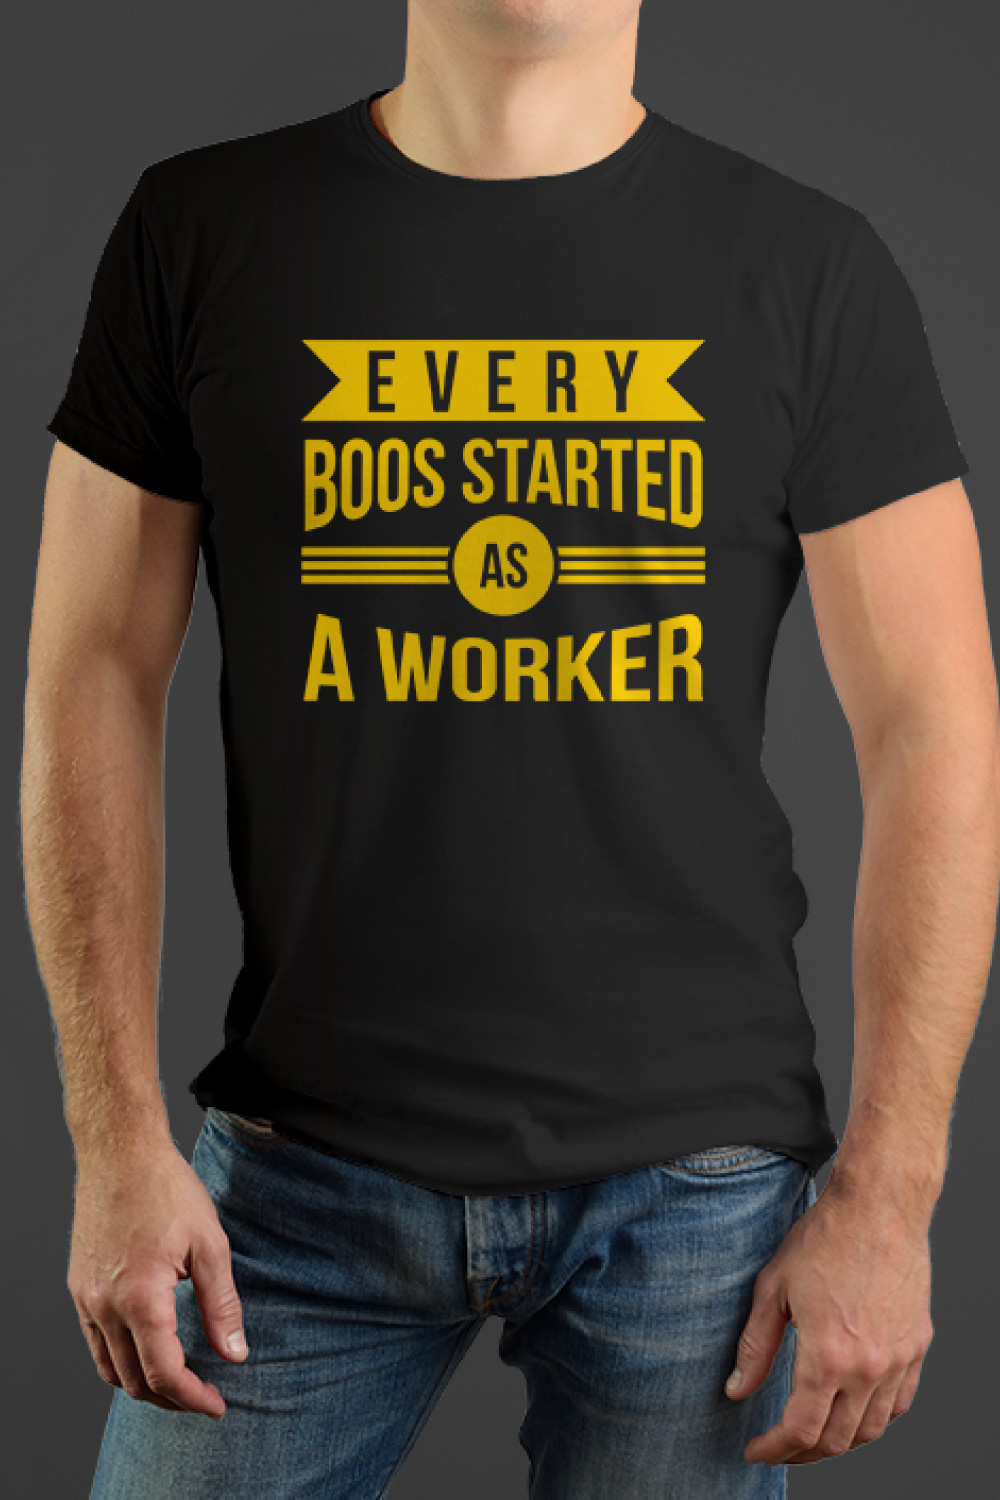 Every boss started as a worker tshirt design pinterest preview image.